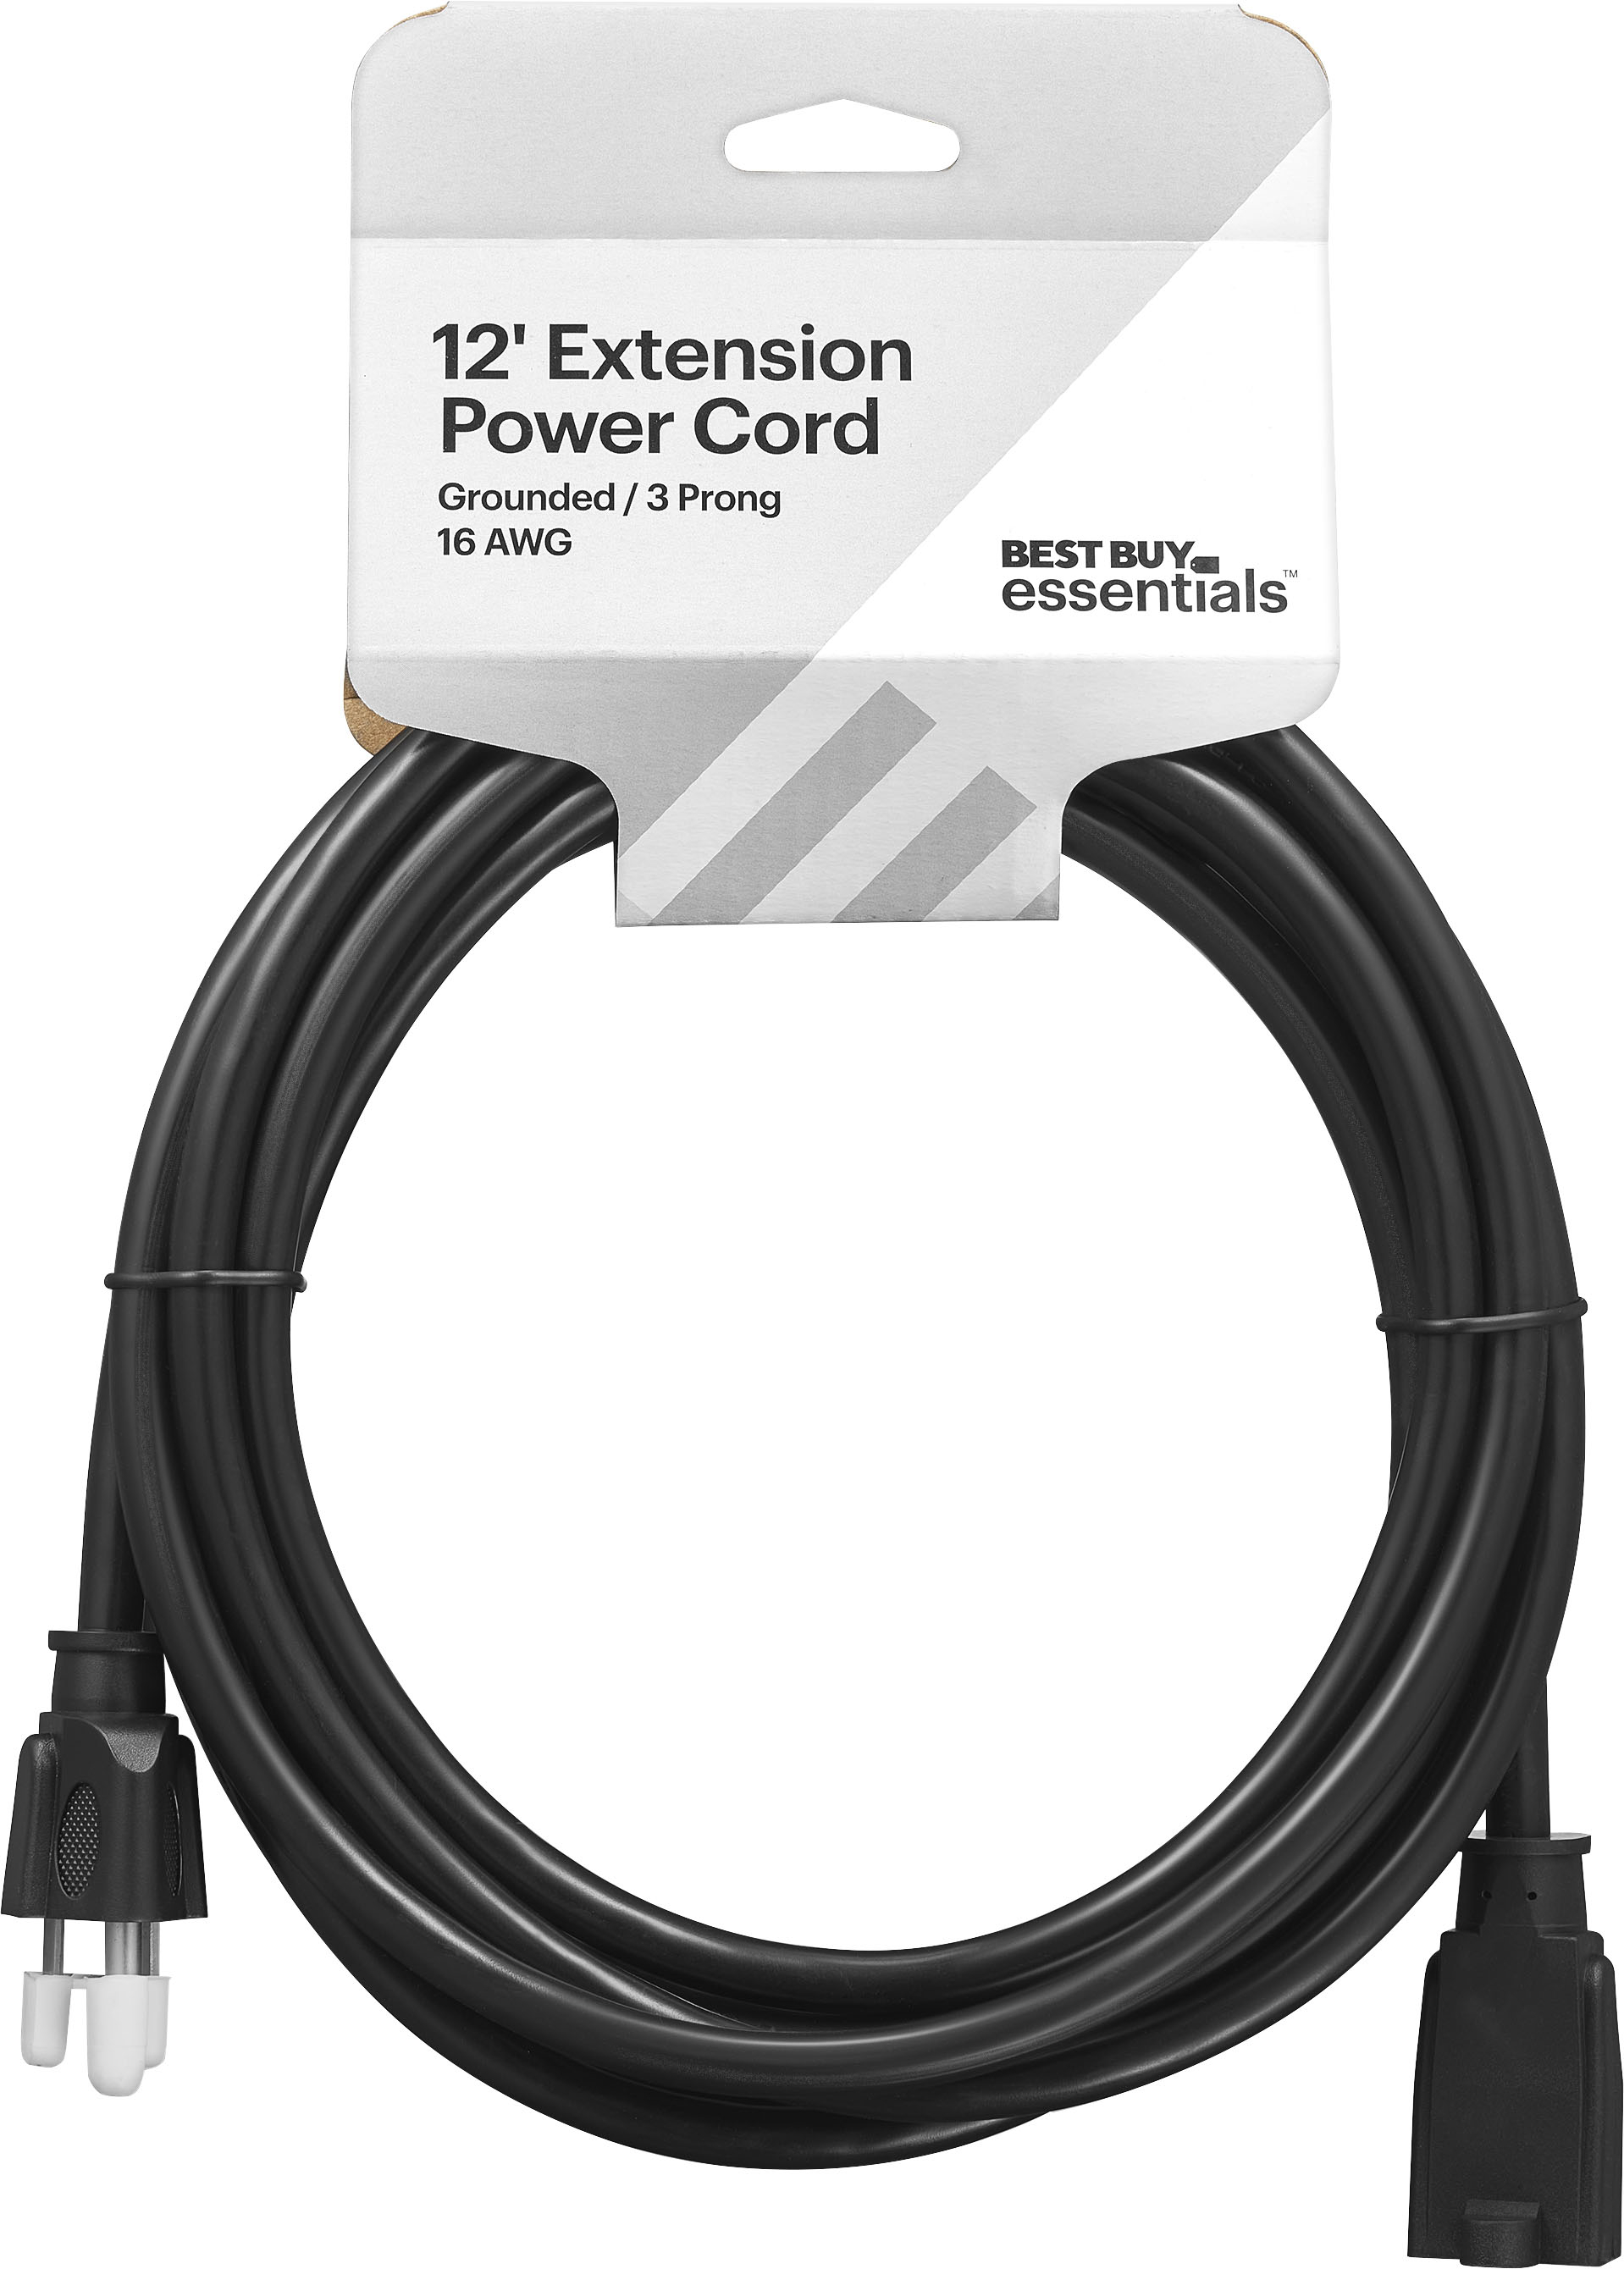 Best Buy essentials™ 12' 16ga Extension Power Cord Black BE-HCL327